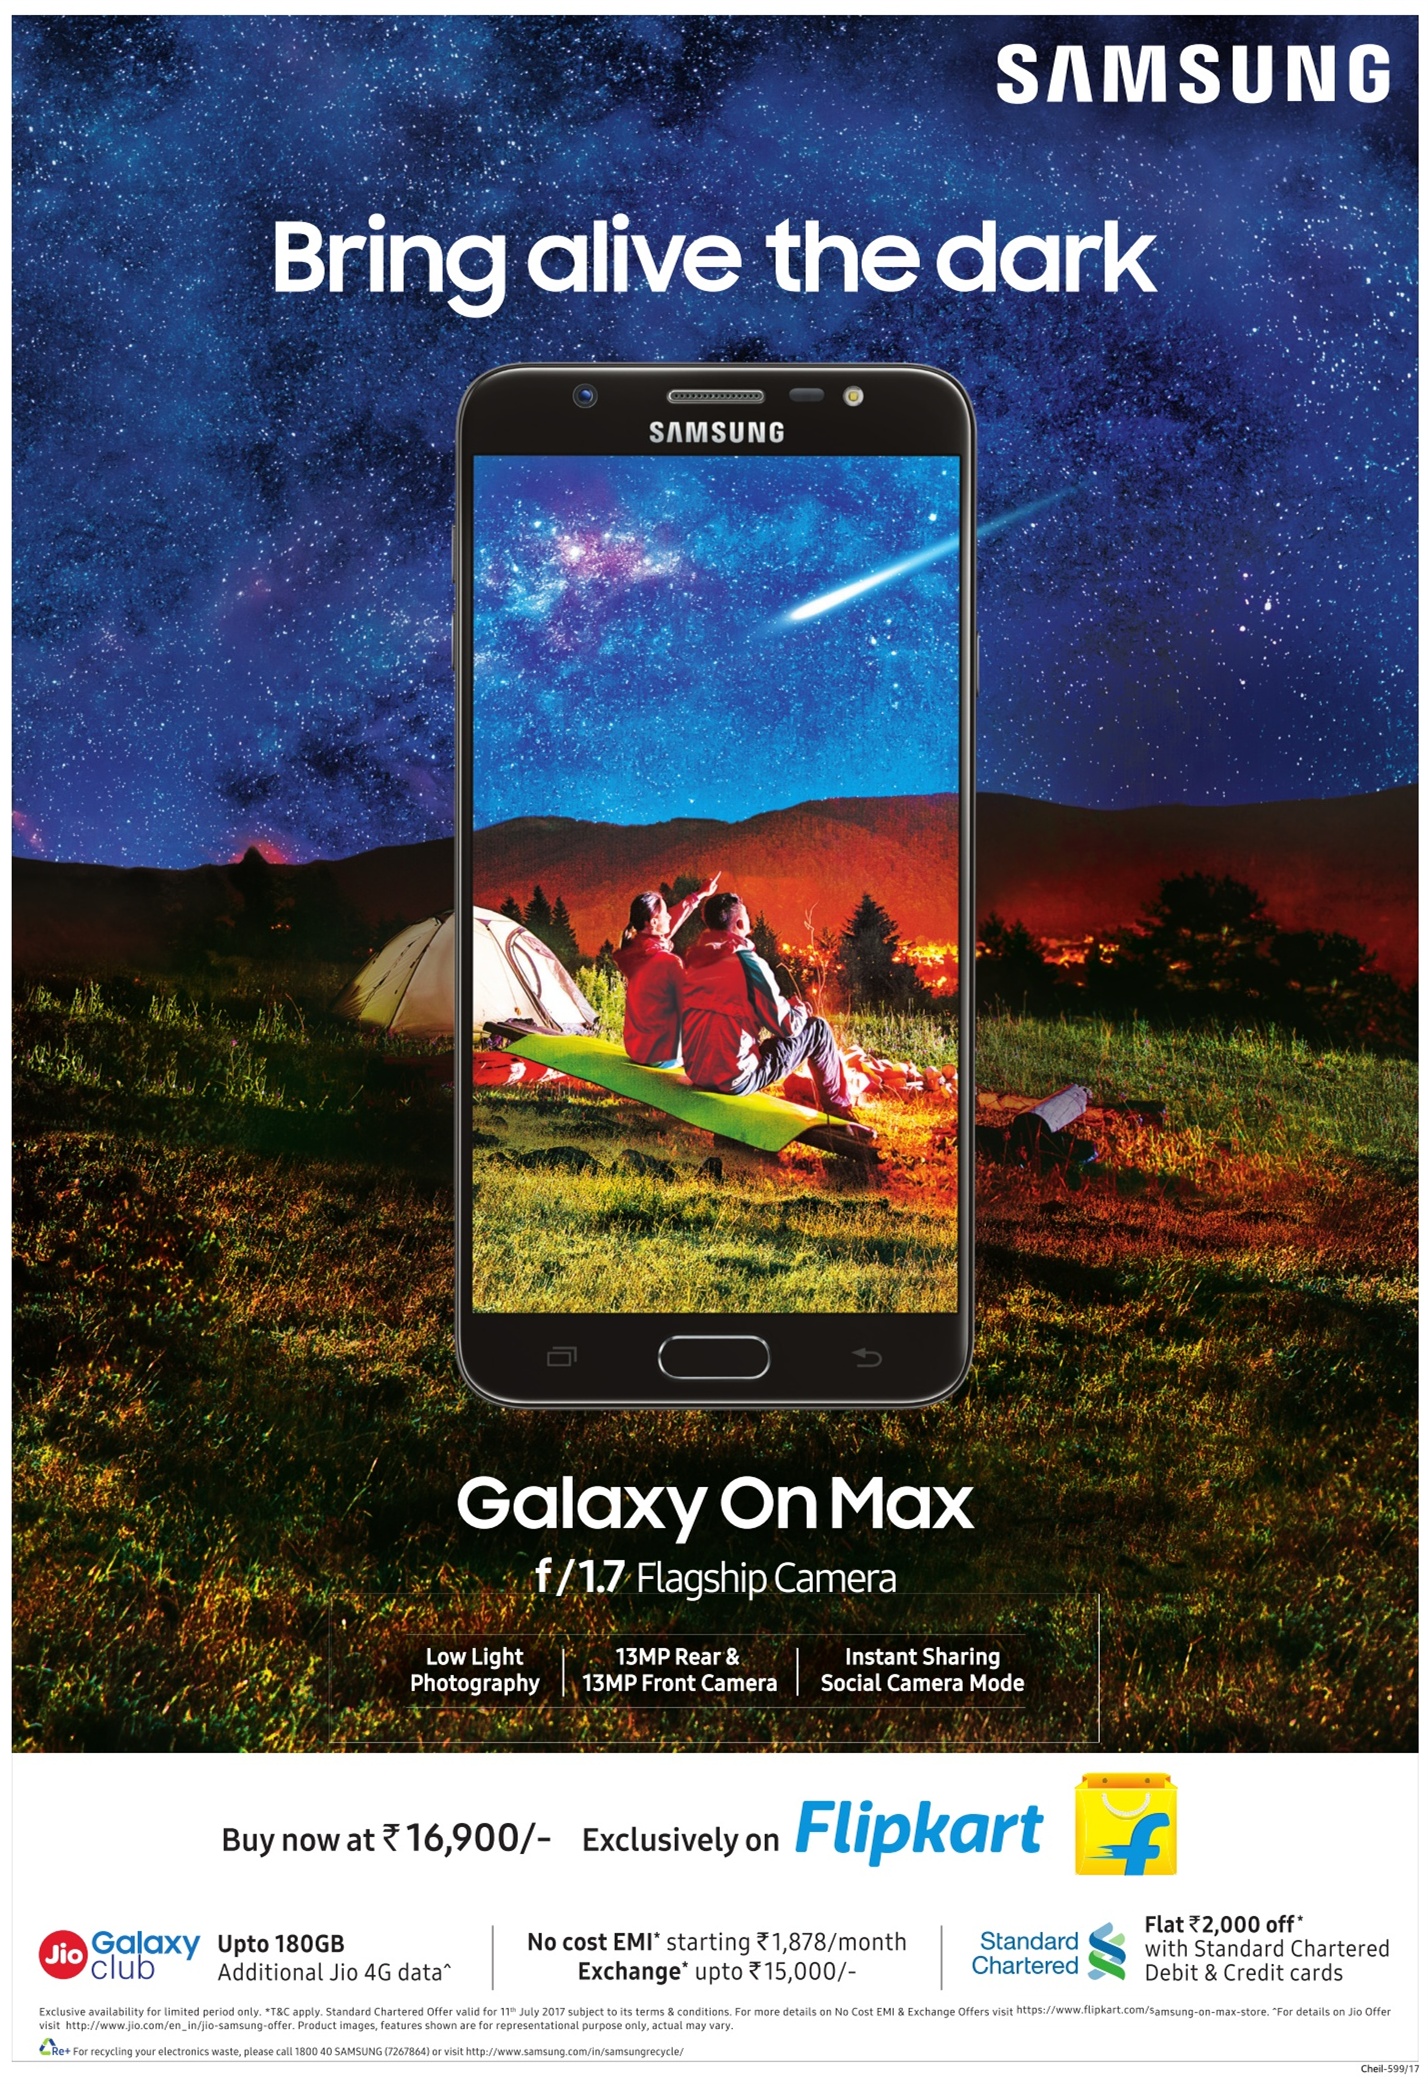 samsung-galaxy-on-max-mobile-ad-times-of